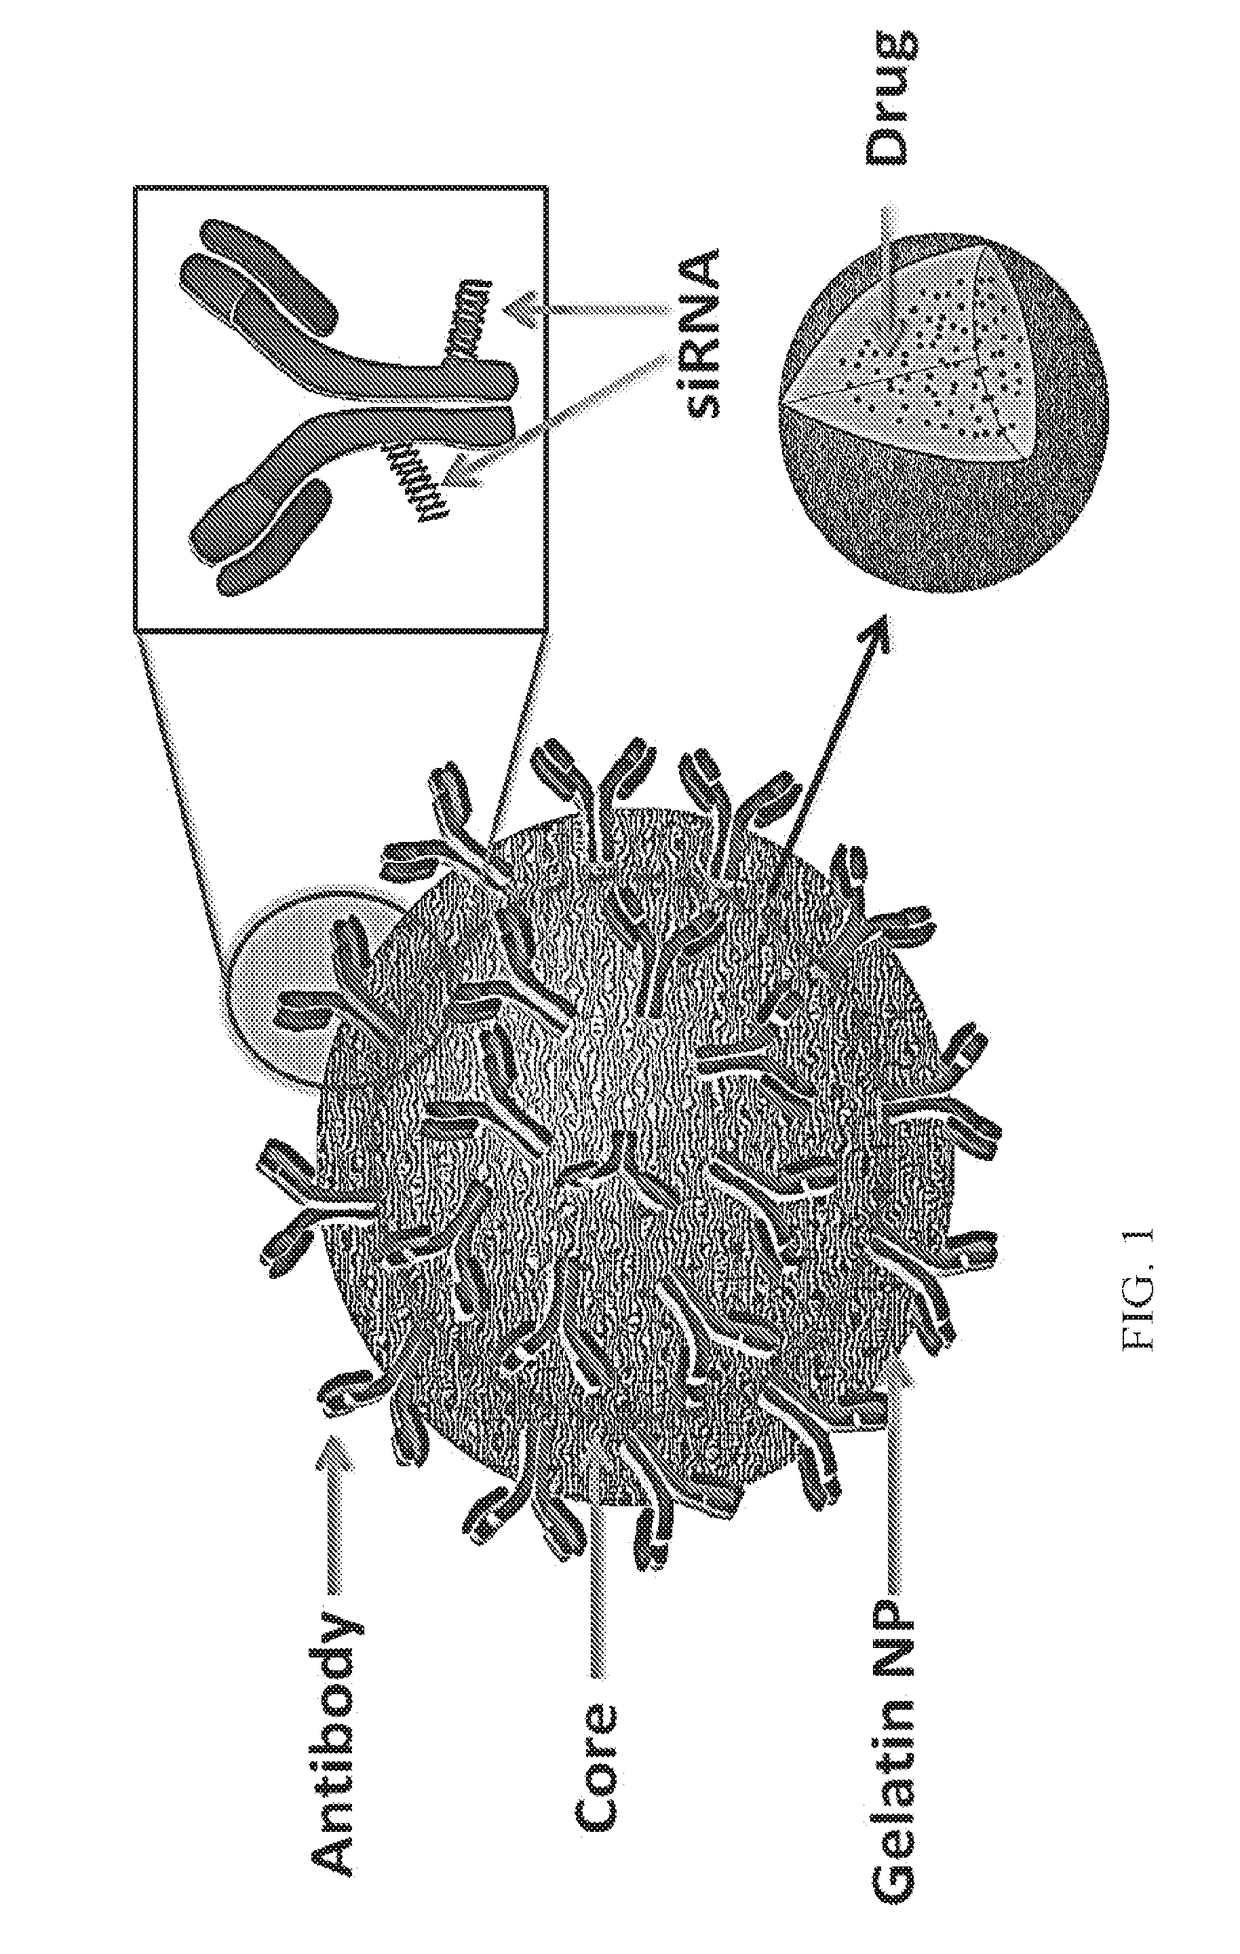 Targeted nanoparticle conjugate and method for co-delivery of sirna and drug